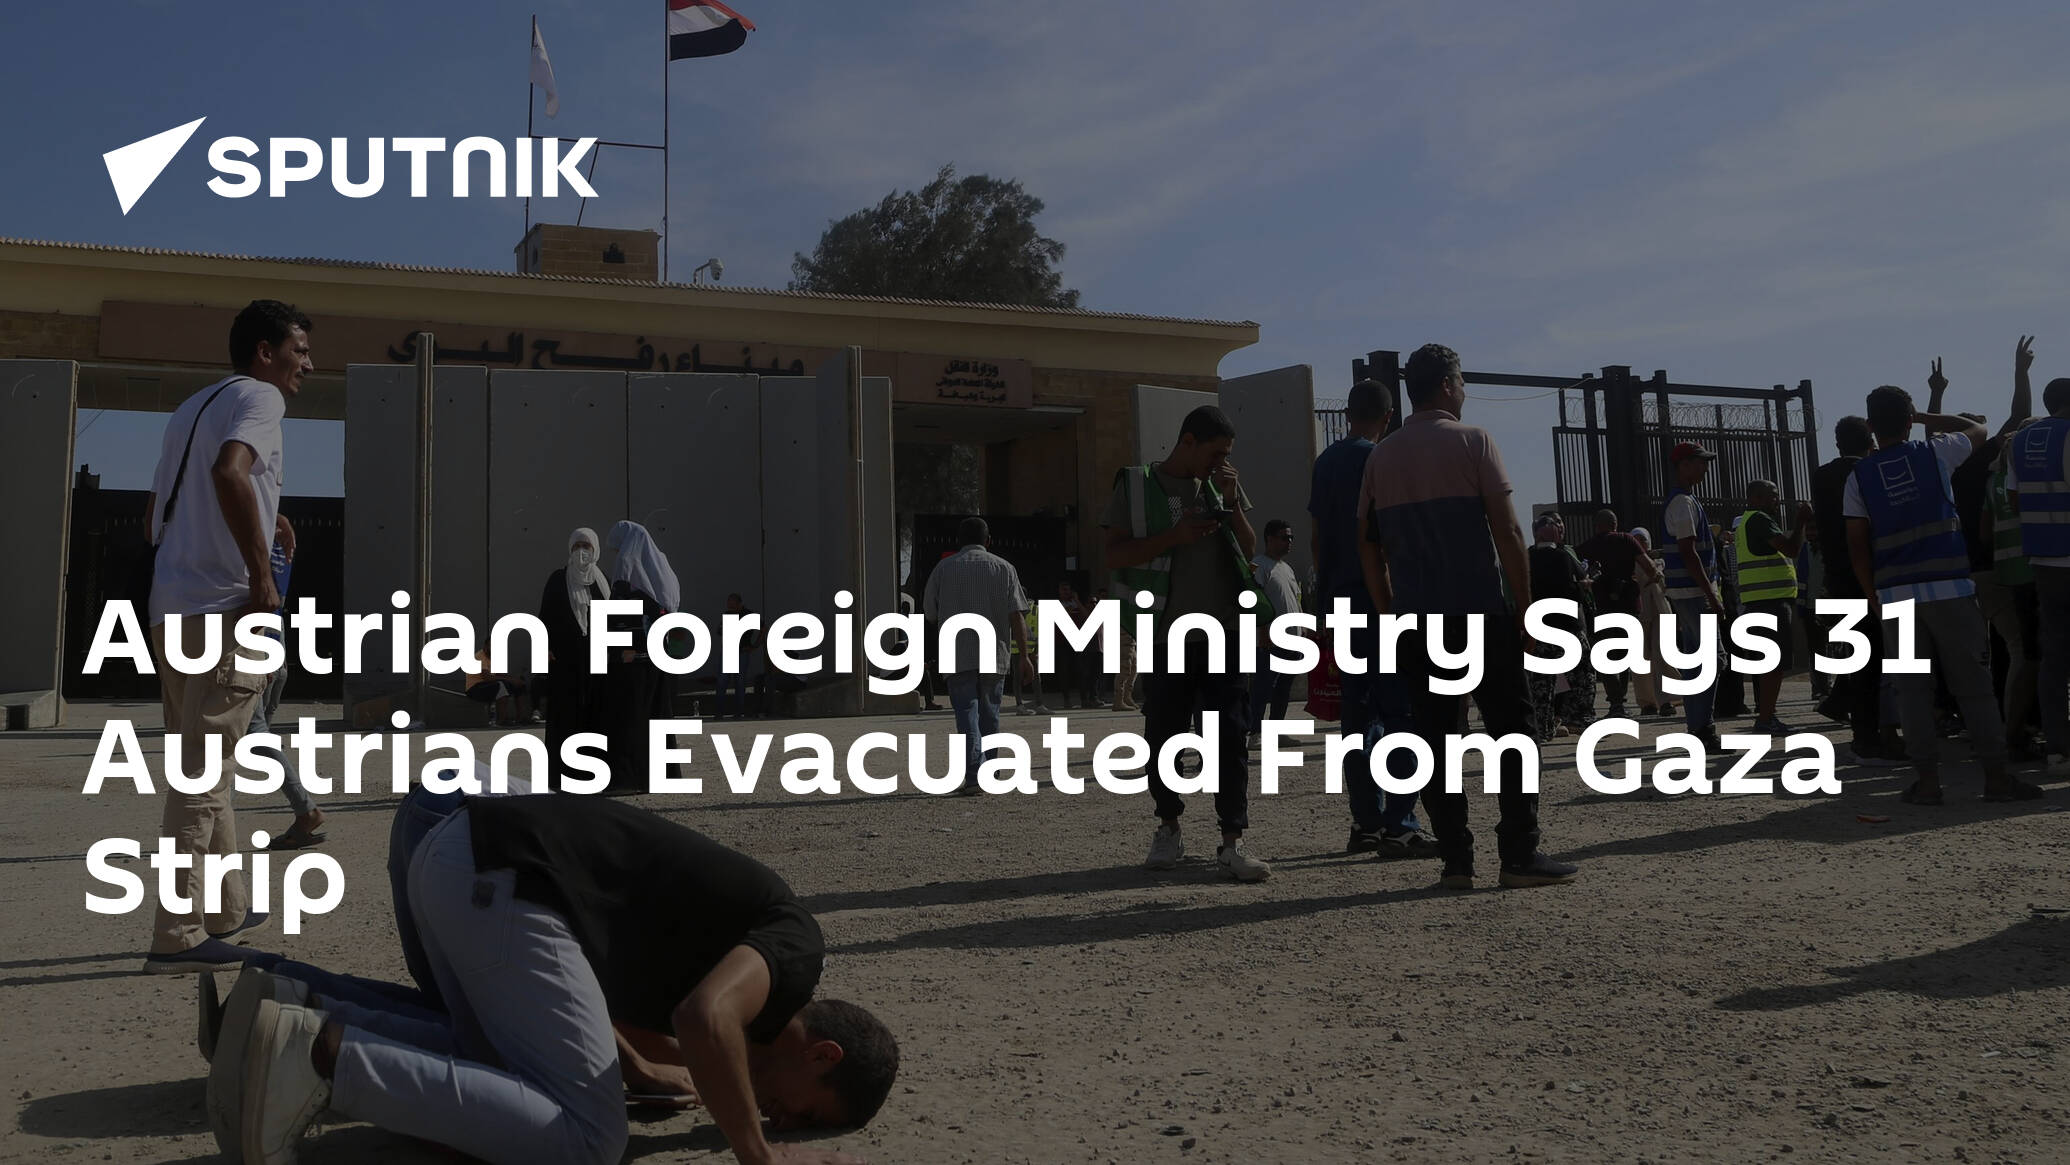 Austrian Foreign Ministry Says 31 Austrians Evacuated From Gaza Strip